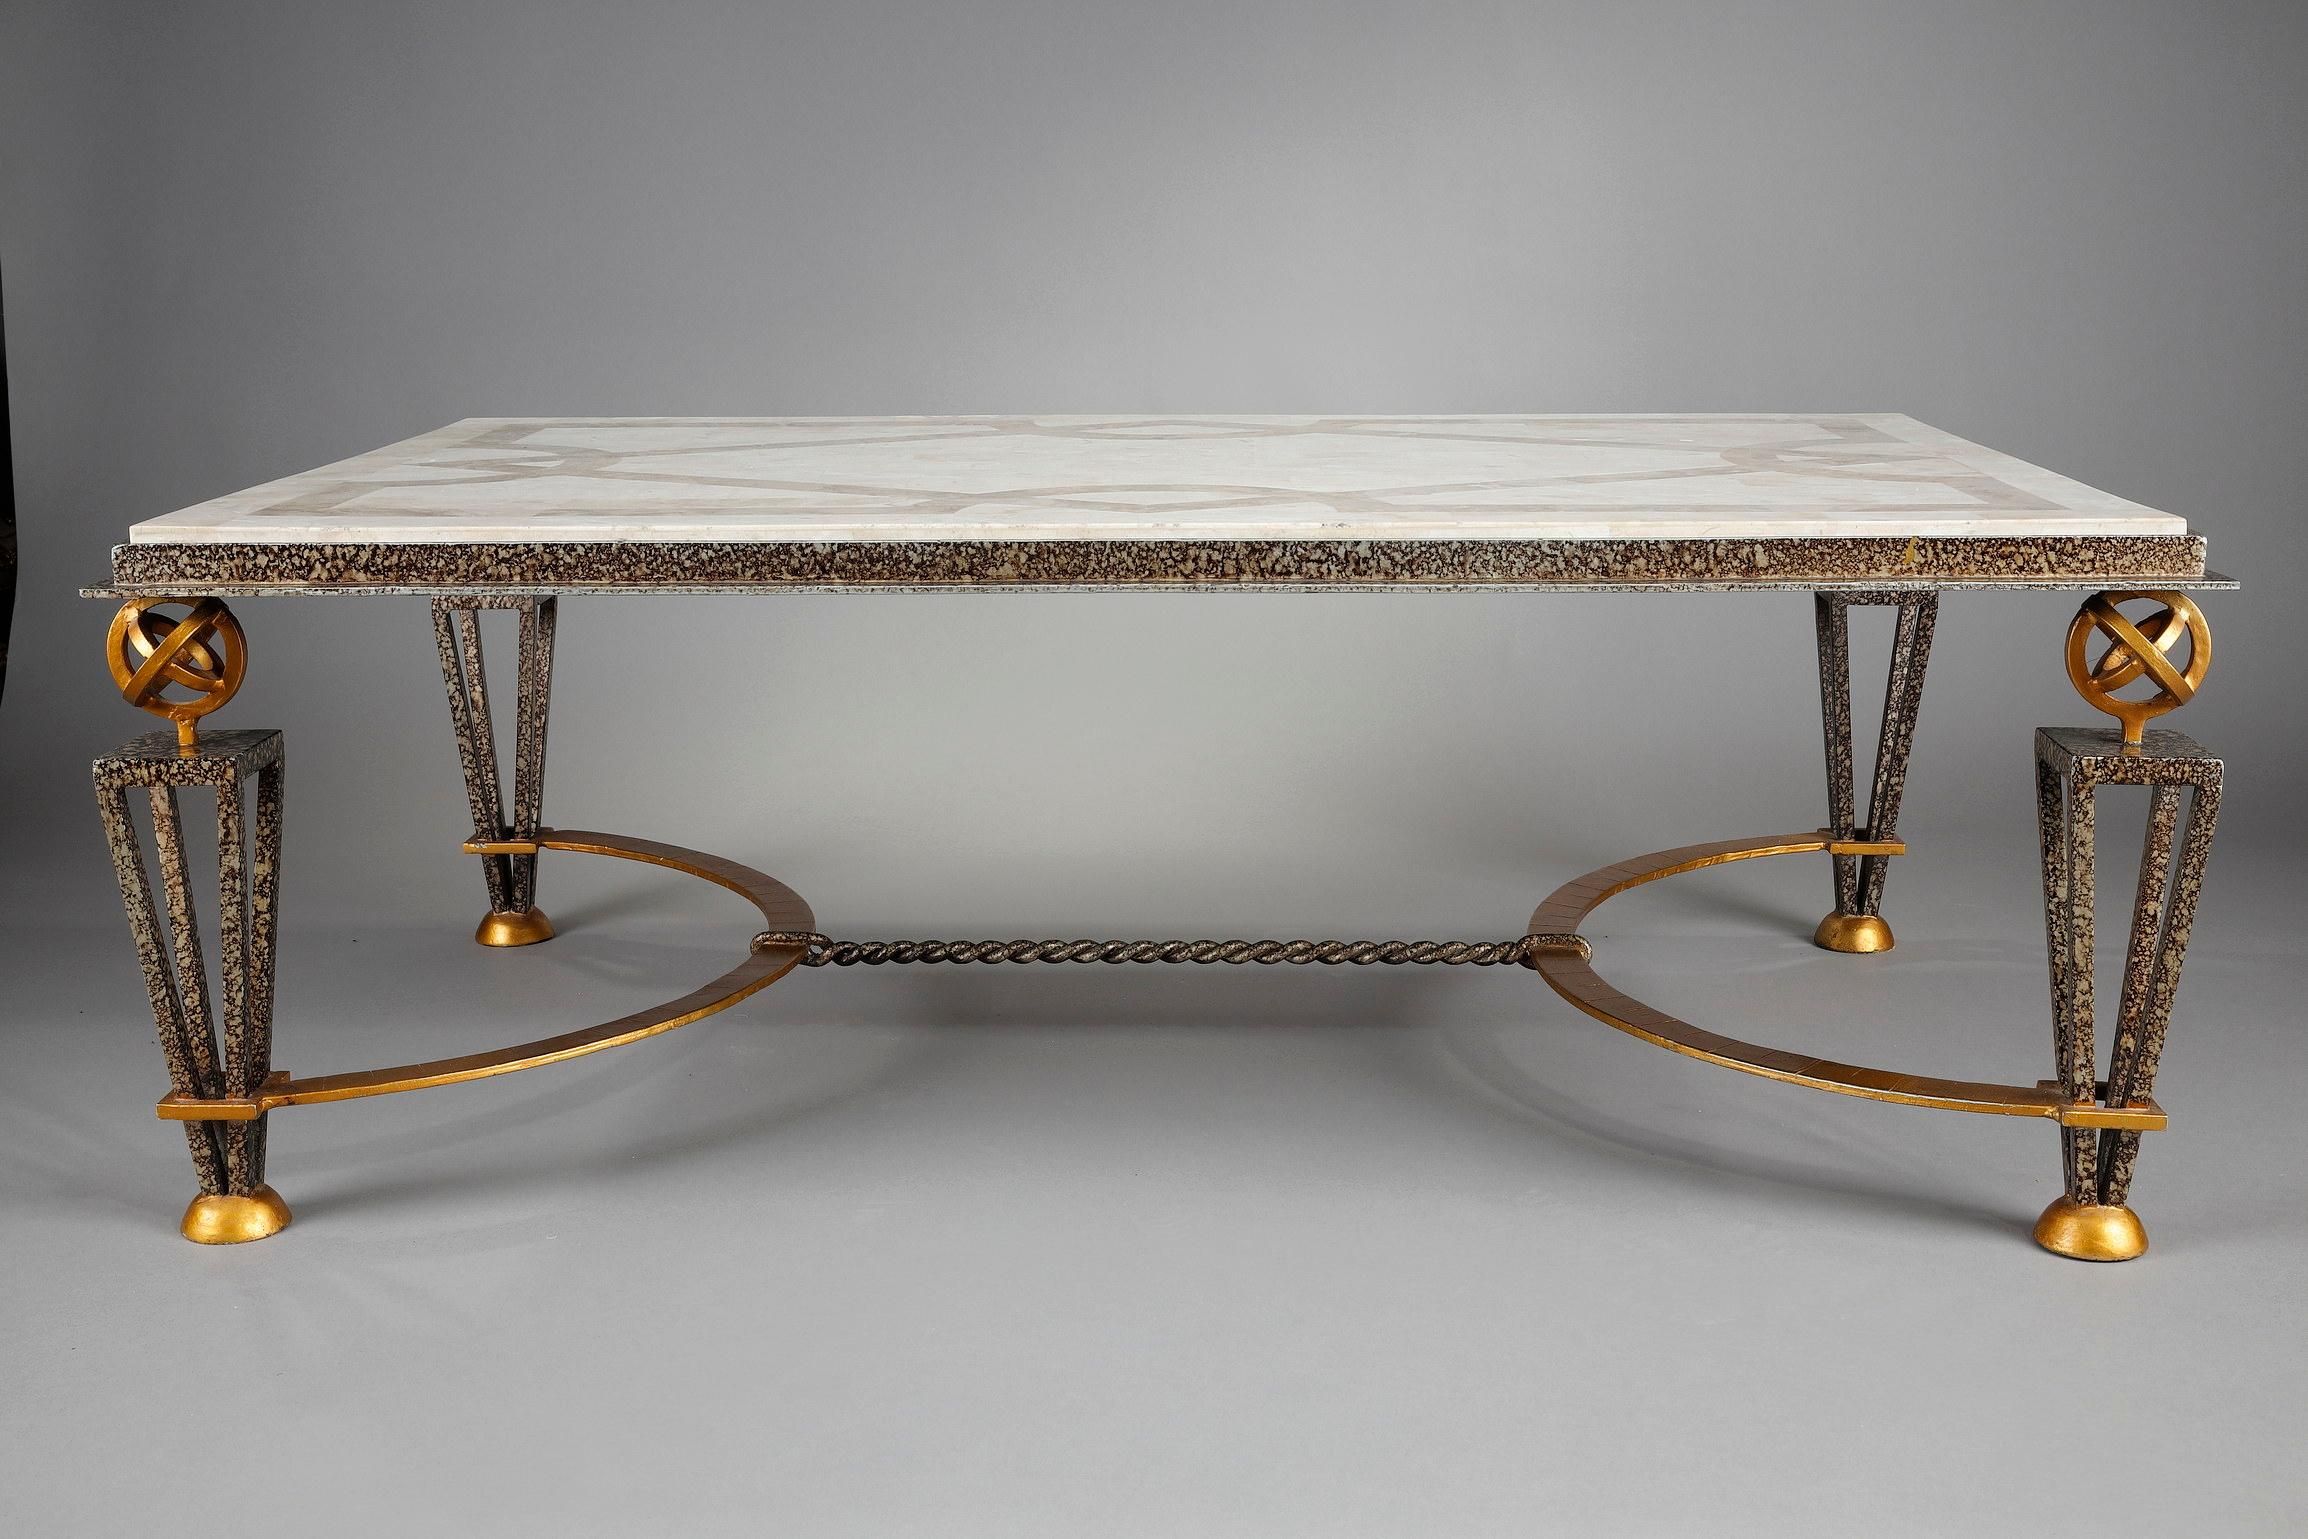 Coffee table in the taste of Gilbert Poillerat in lacquered, oxidized and gilded metal. It rests on four openwork tapered legs with decorative globes on top. The base is joined by a twisted semi-circular crosspiece. The top is composed of a